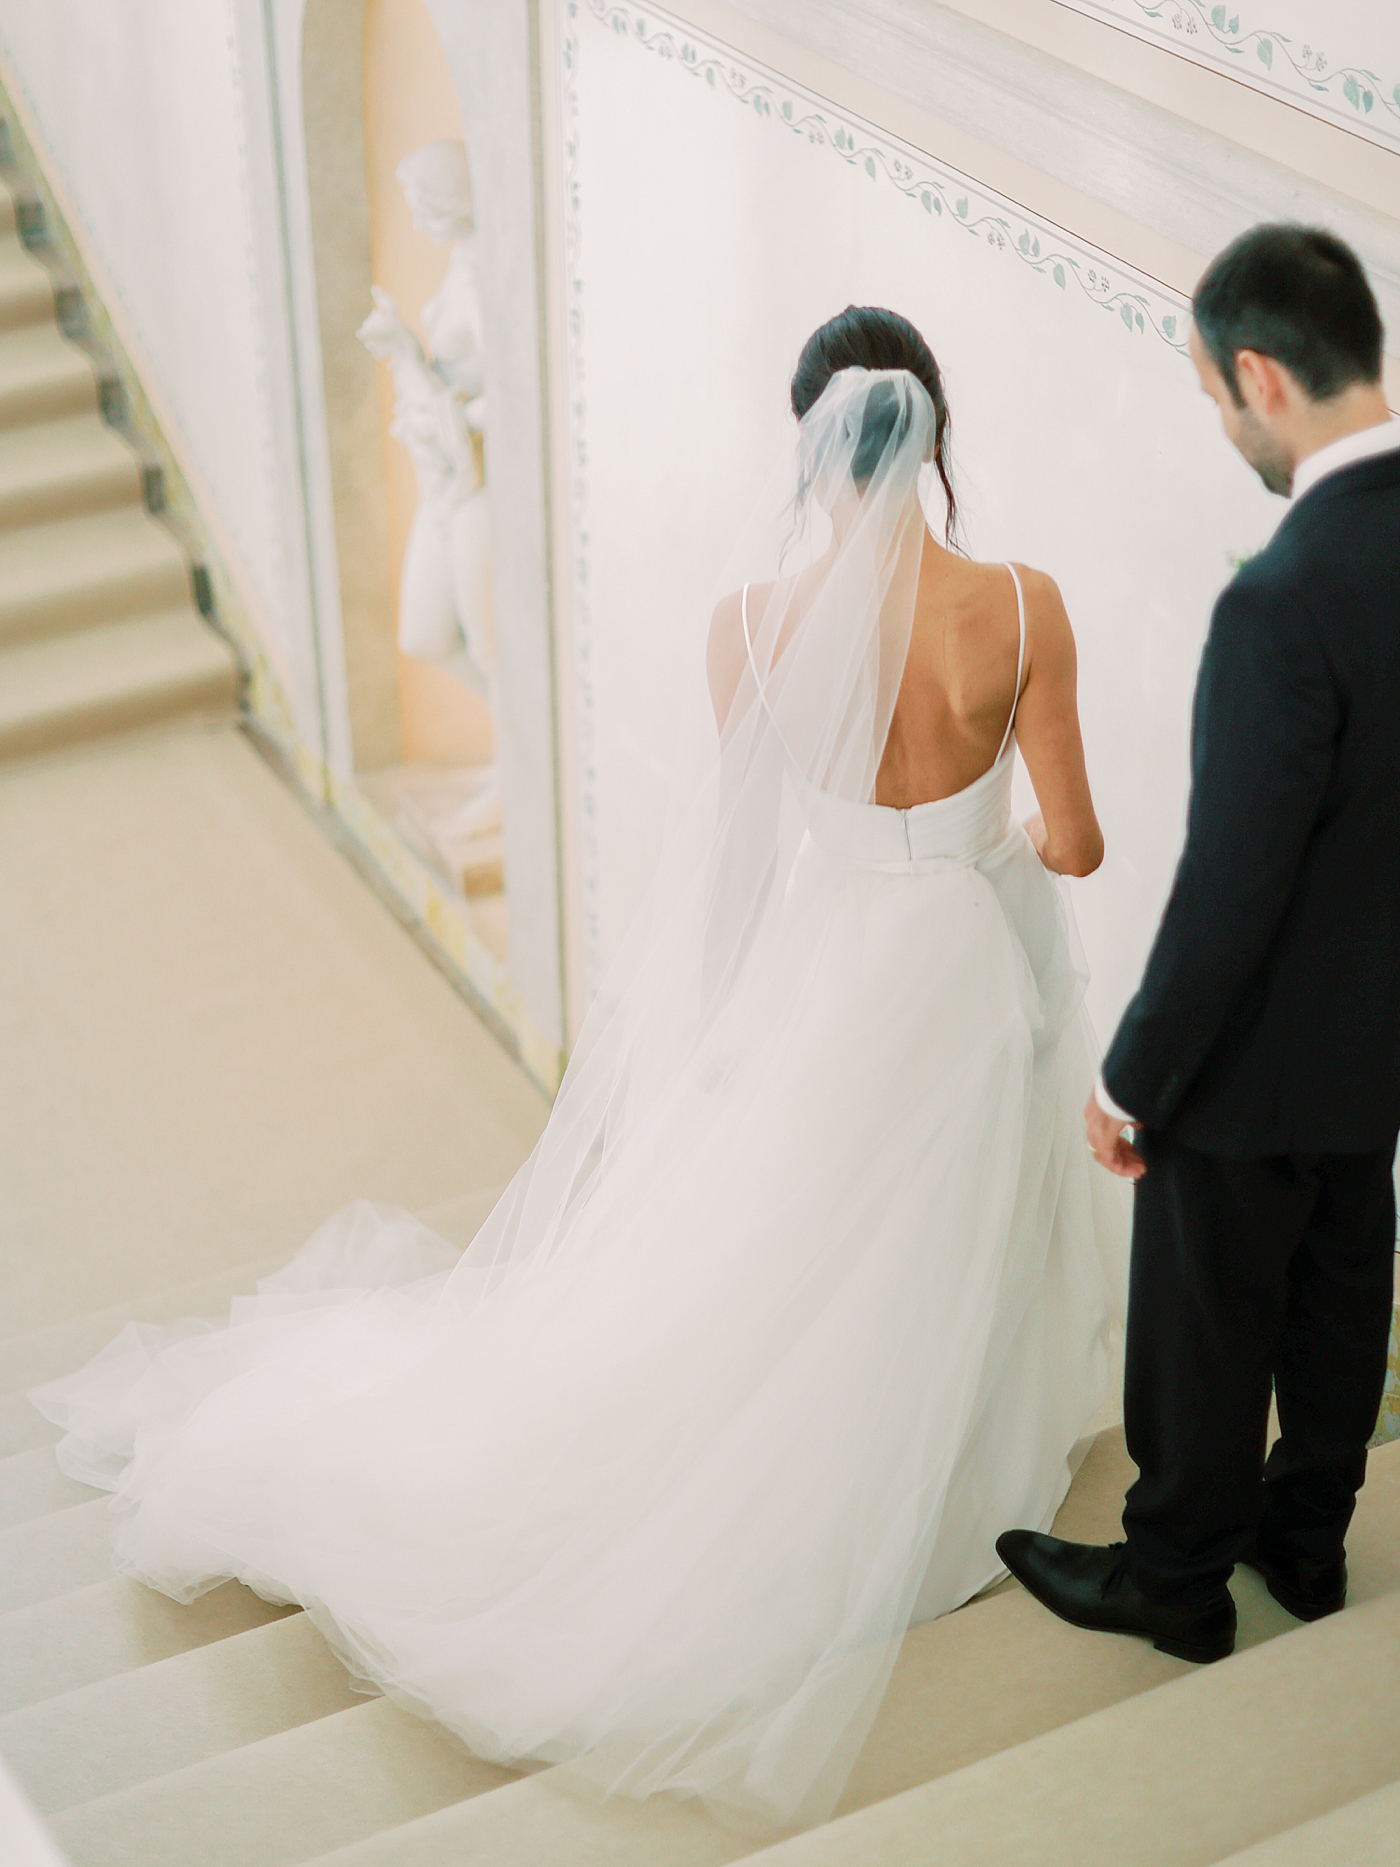 Bride and groom walking down stairs | Image by Diane Sotero Photography